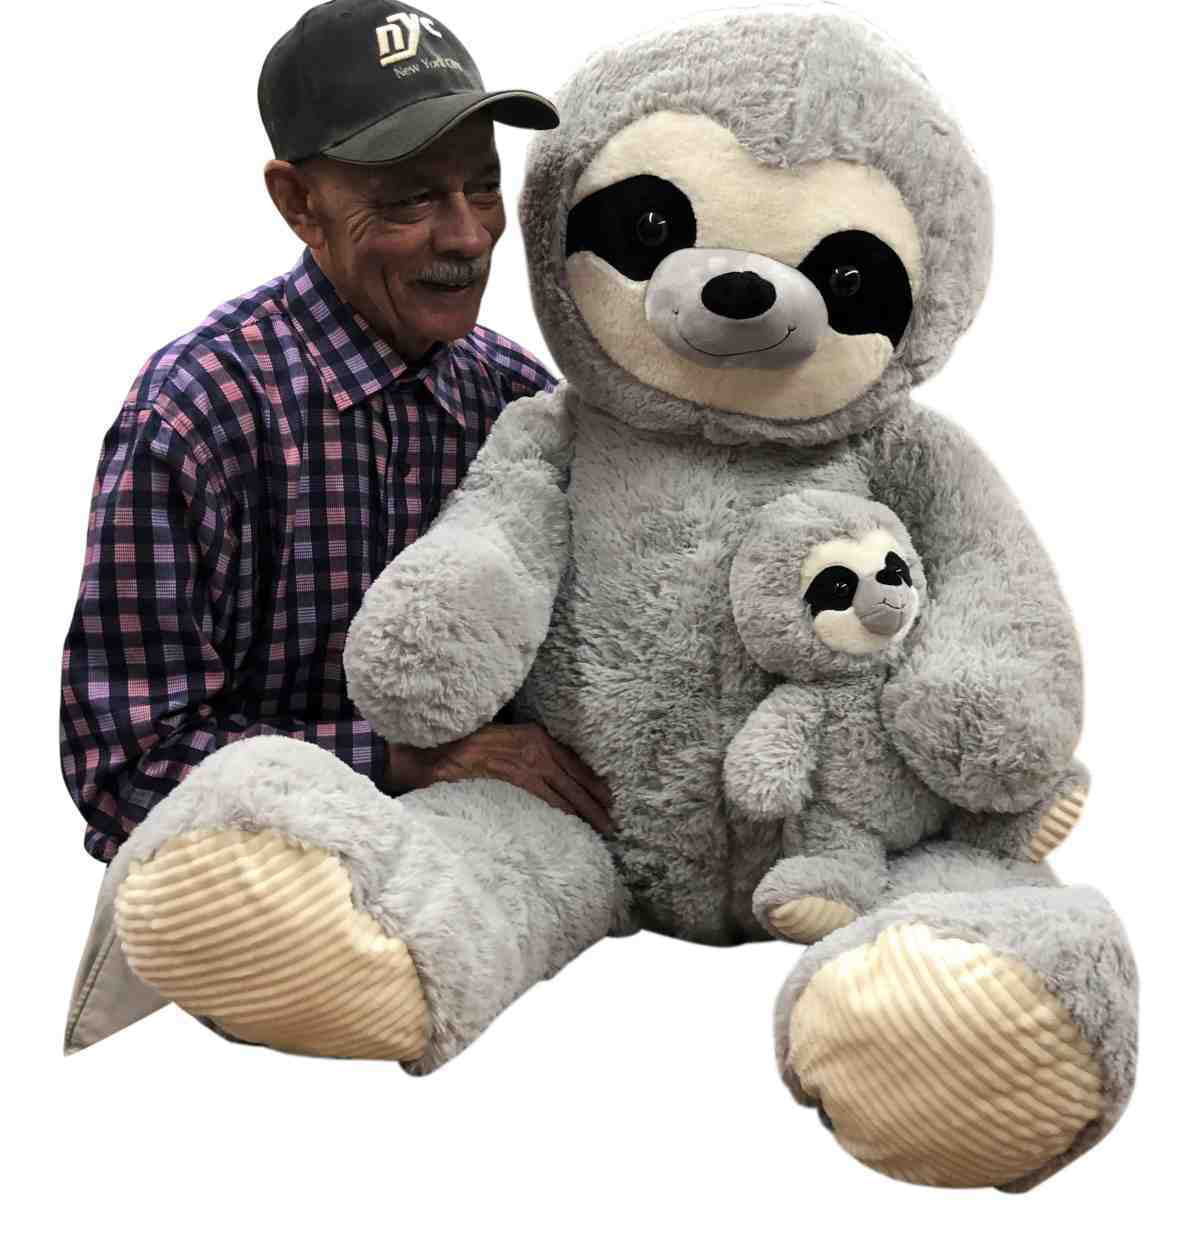 5 Foot Giant Stuffed Sloth with Baby 56 Inches Soft 142 cm Big Plush